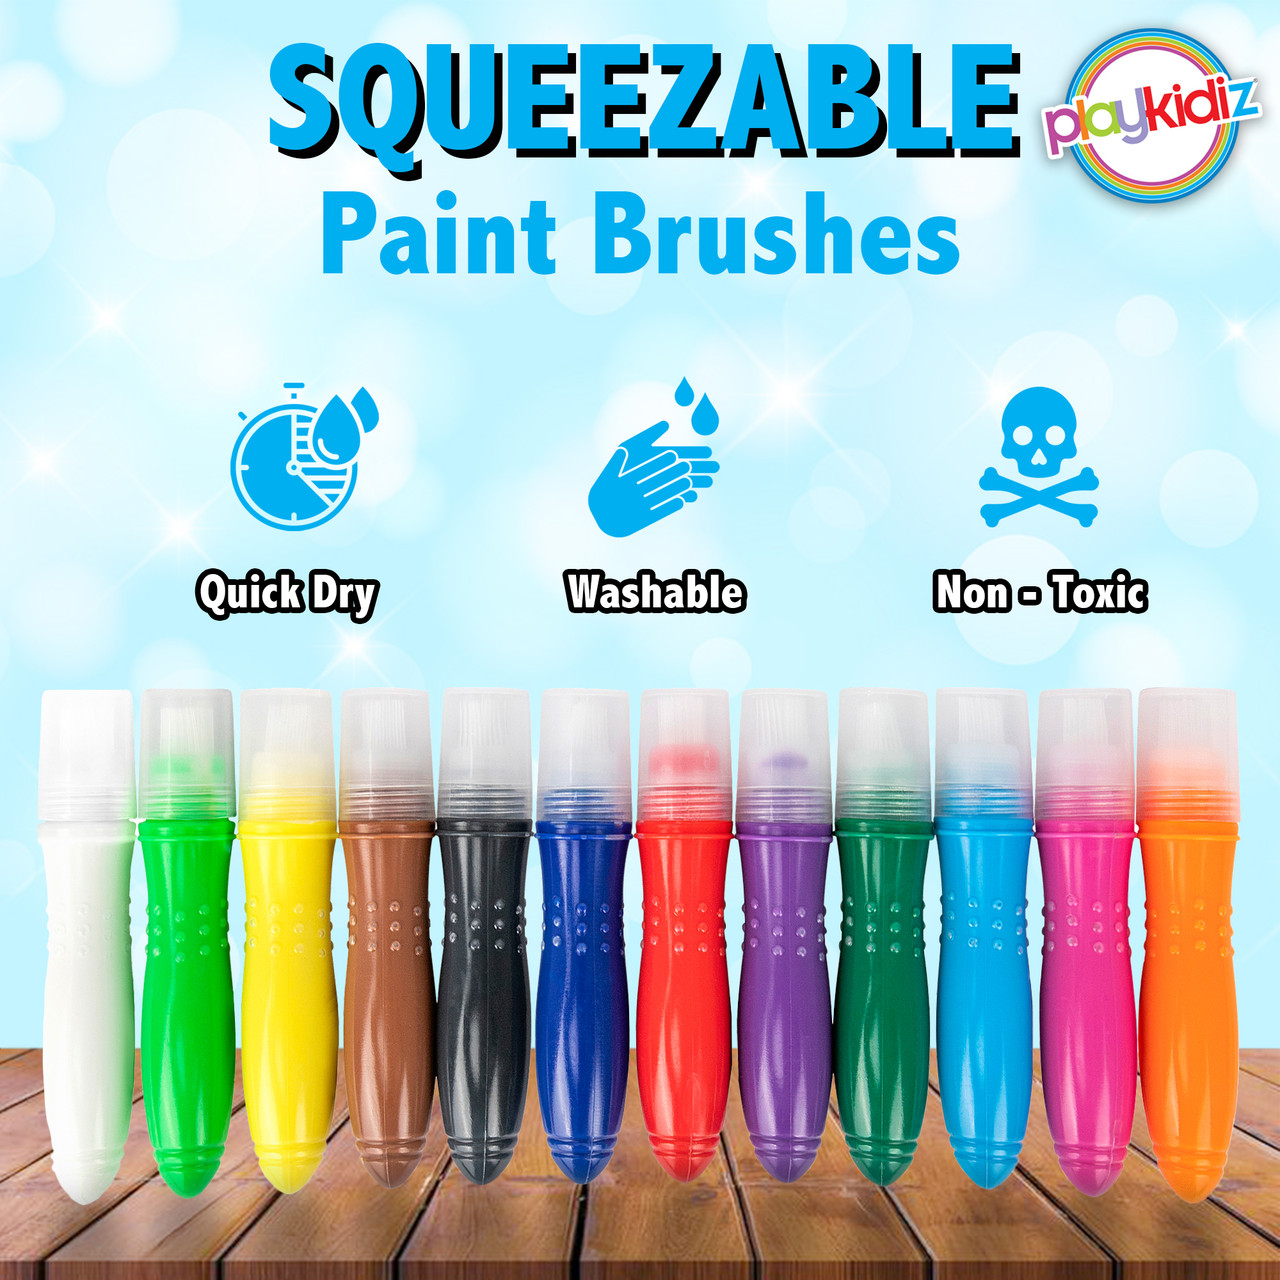 Playkidiz Squeezable Paint Brushes Classic Colors For Kids